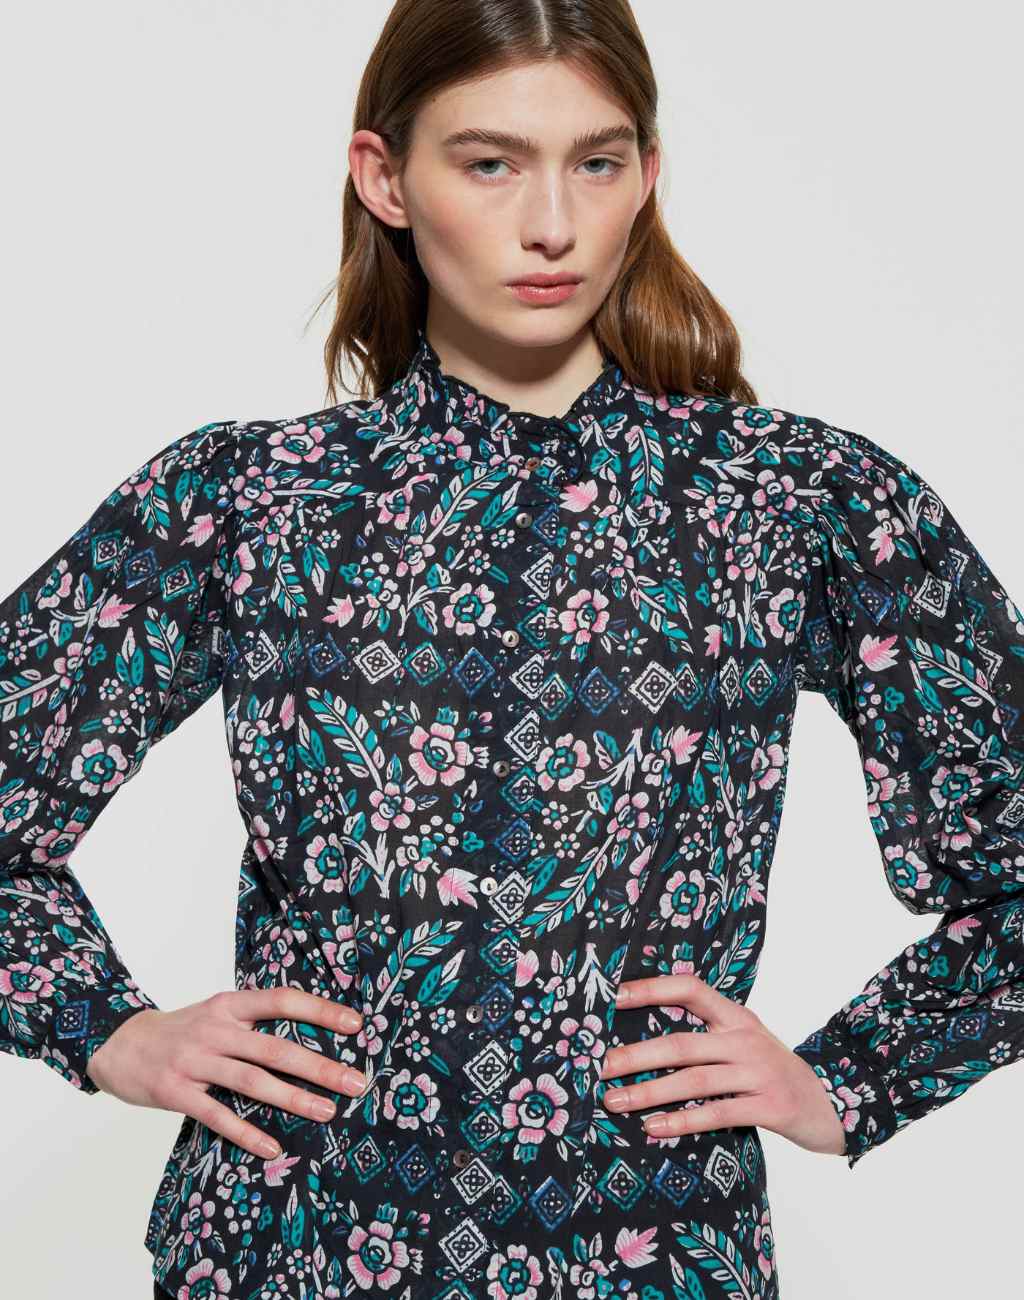 Block Print Flora Blouse with Floral and Geometric Print, Ruffle Collar, and Puffed Sleeves